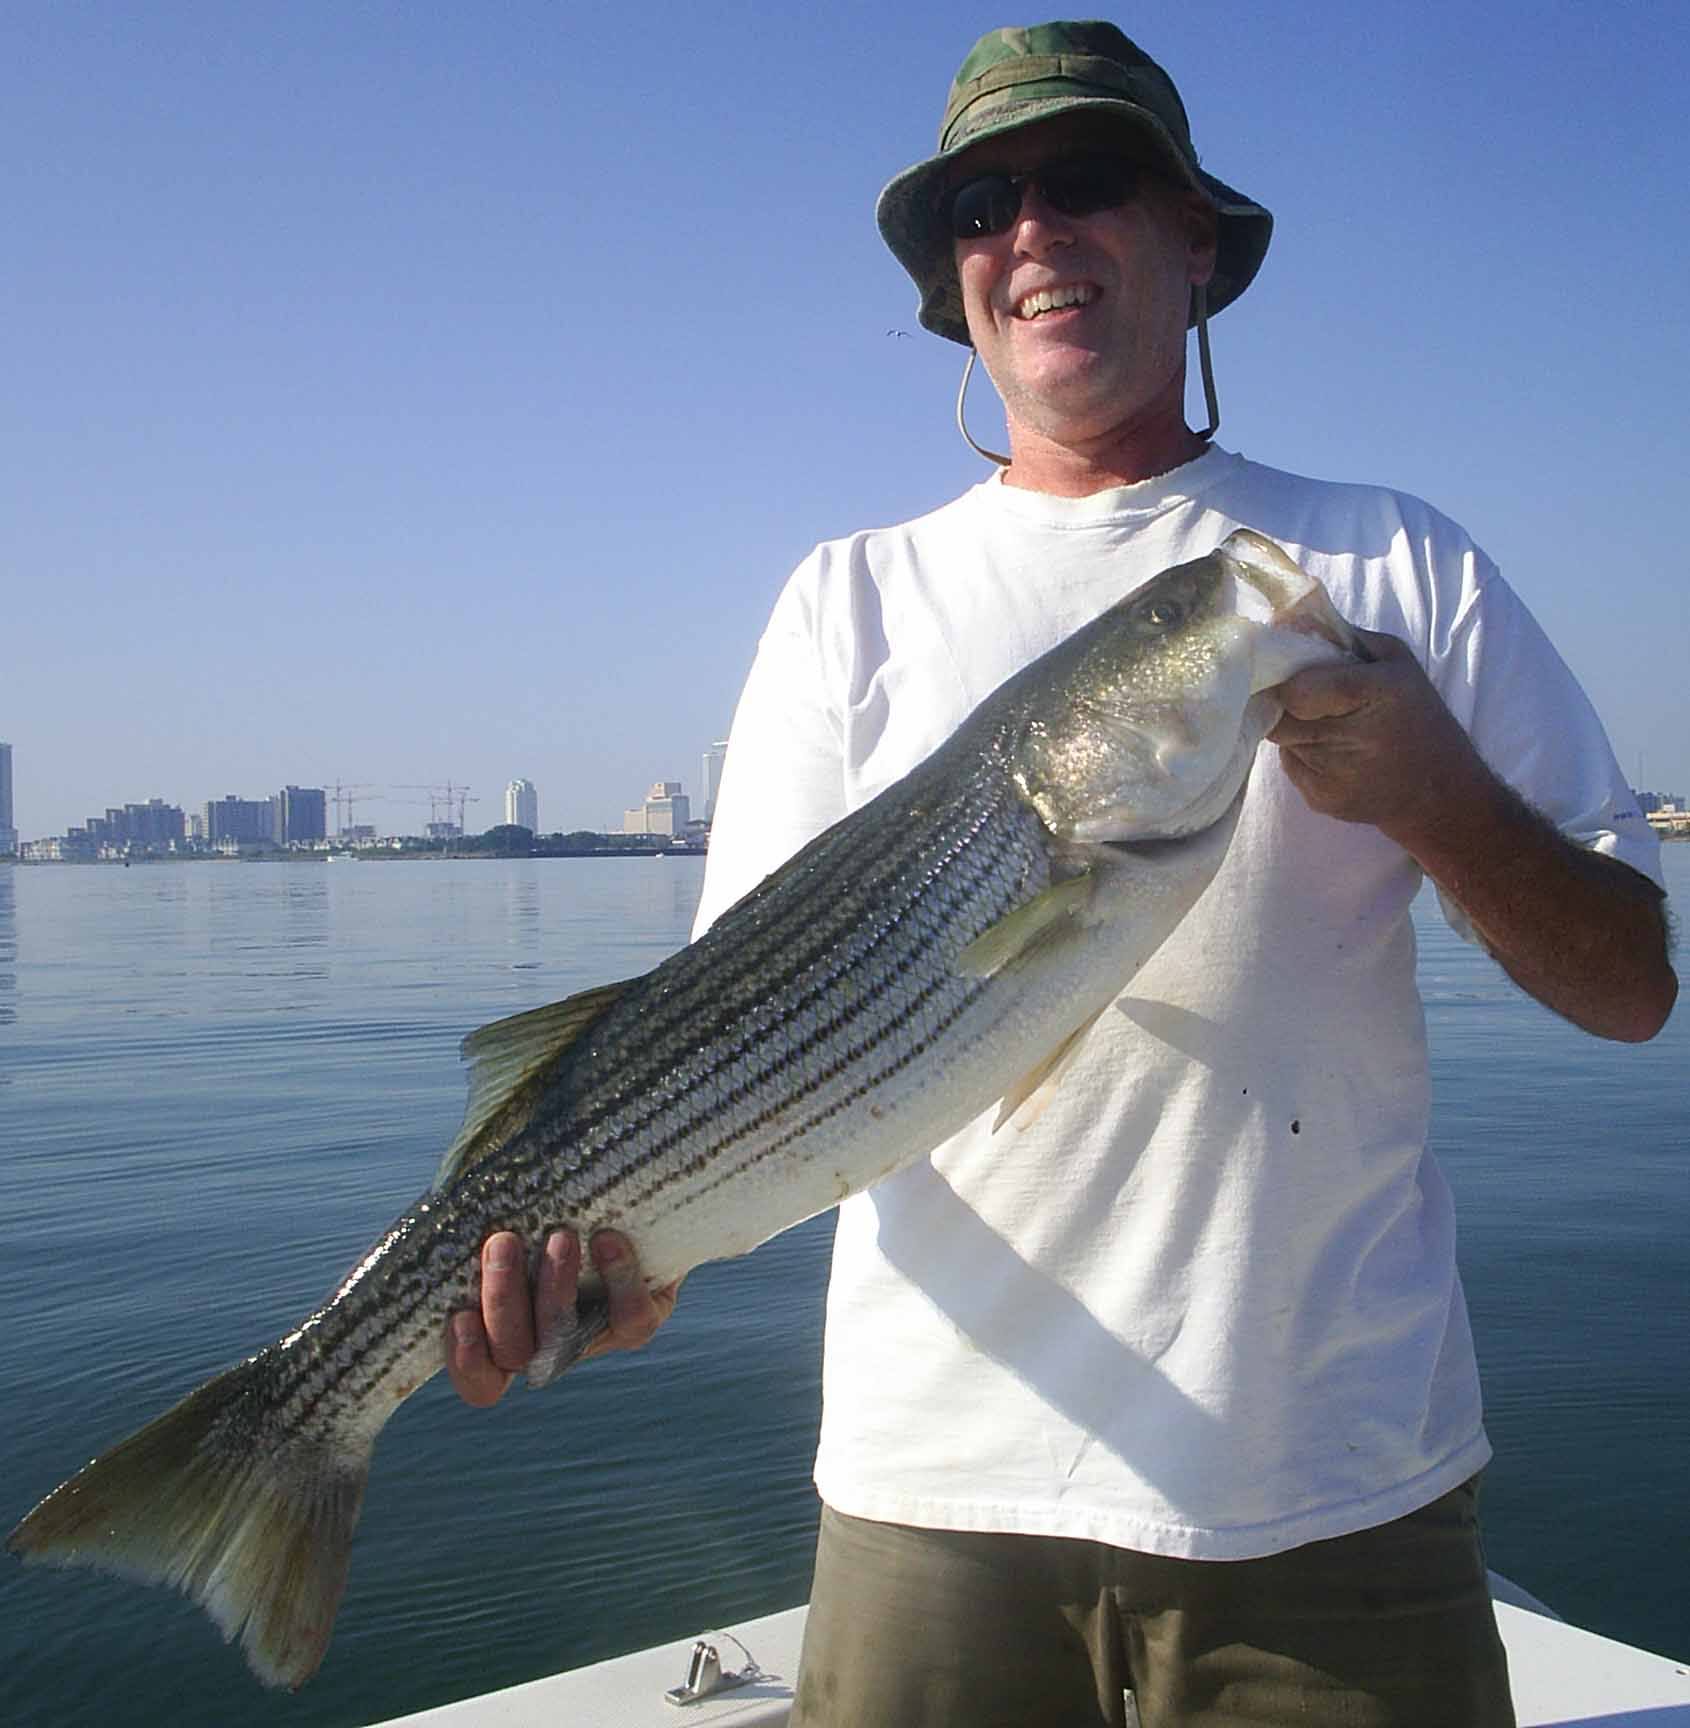 Striper or striped bass are lots of fun to catch!